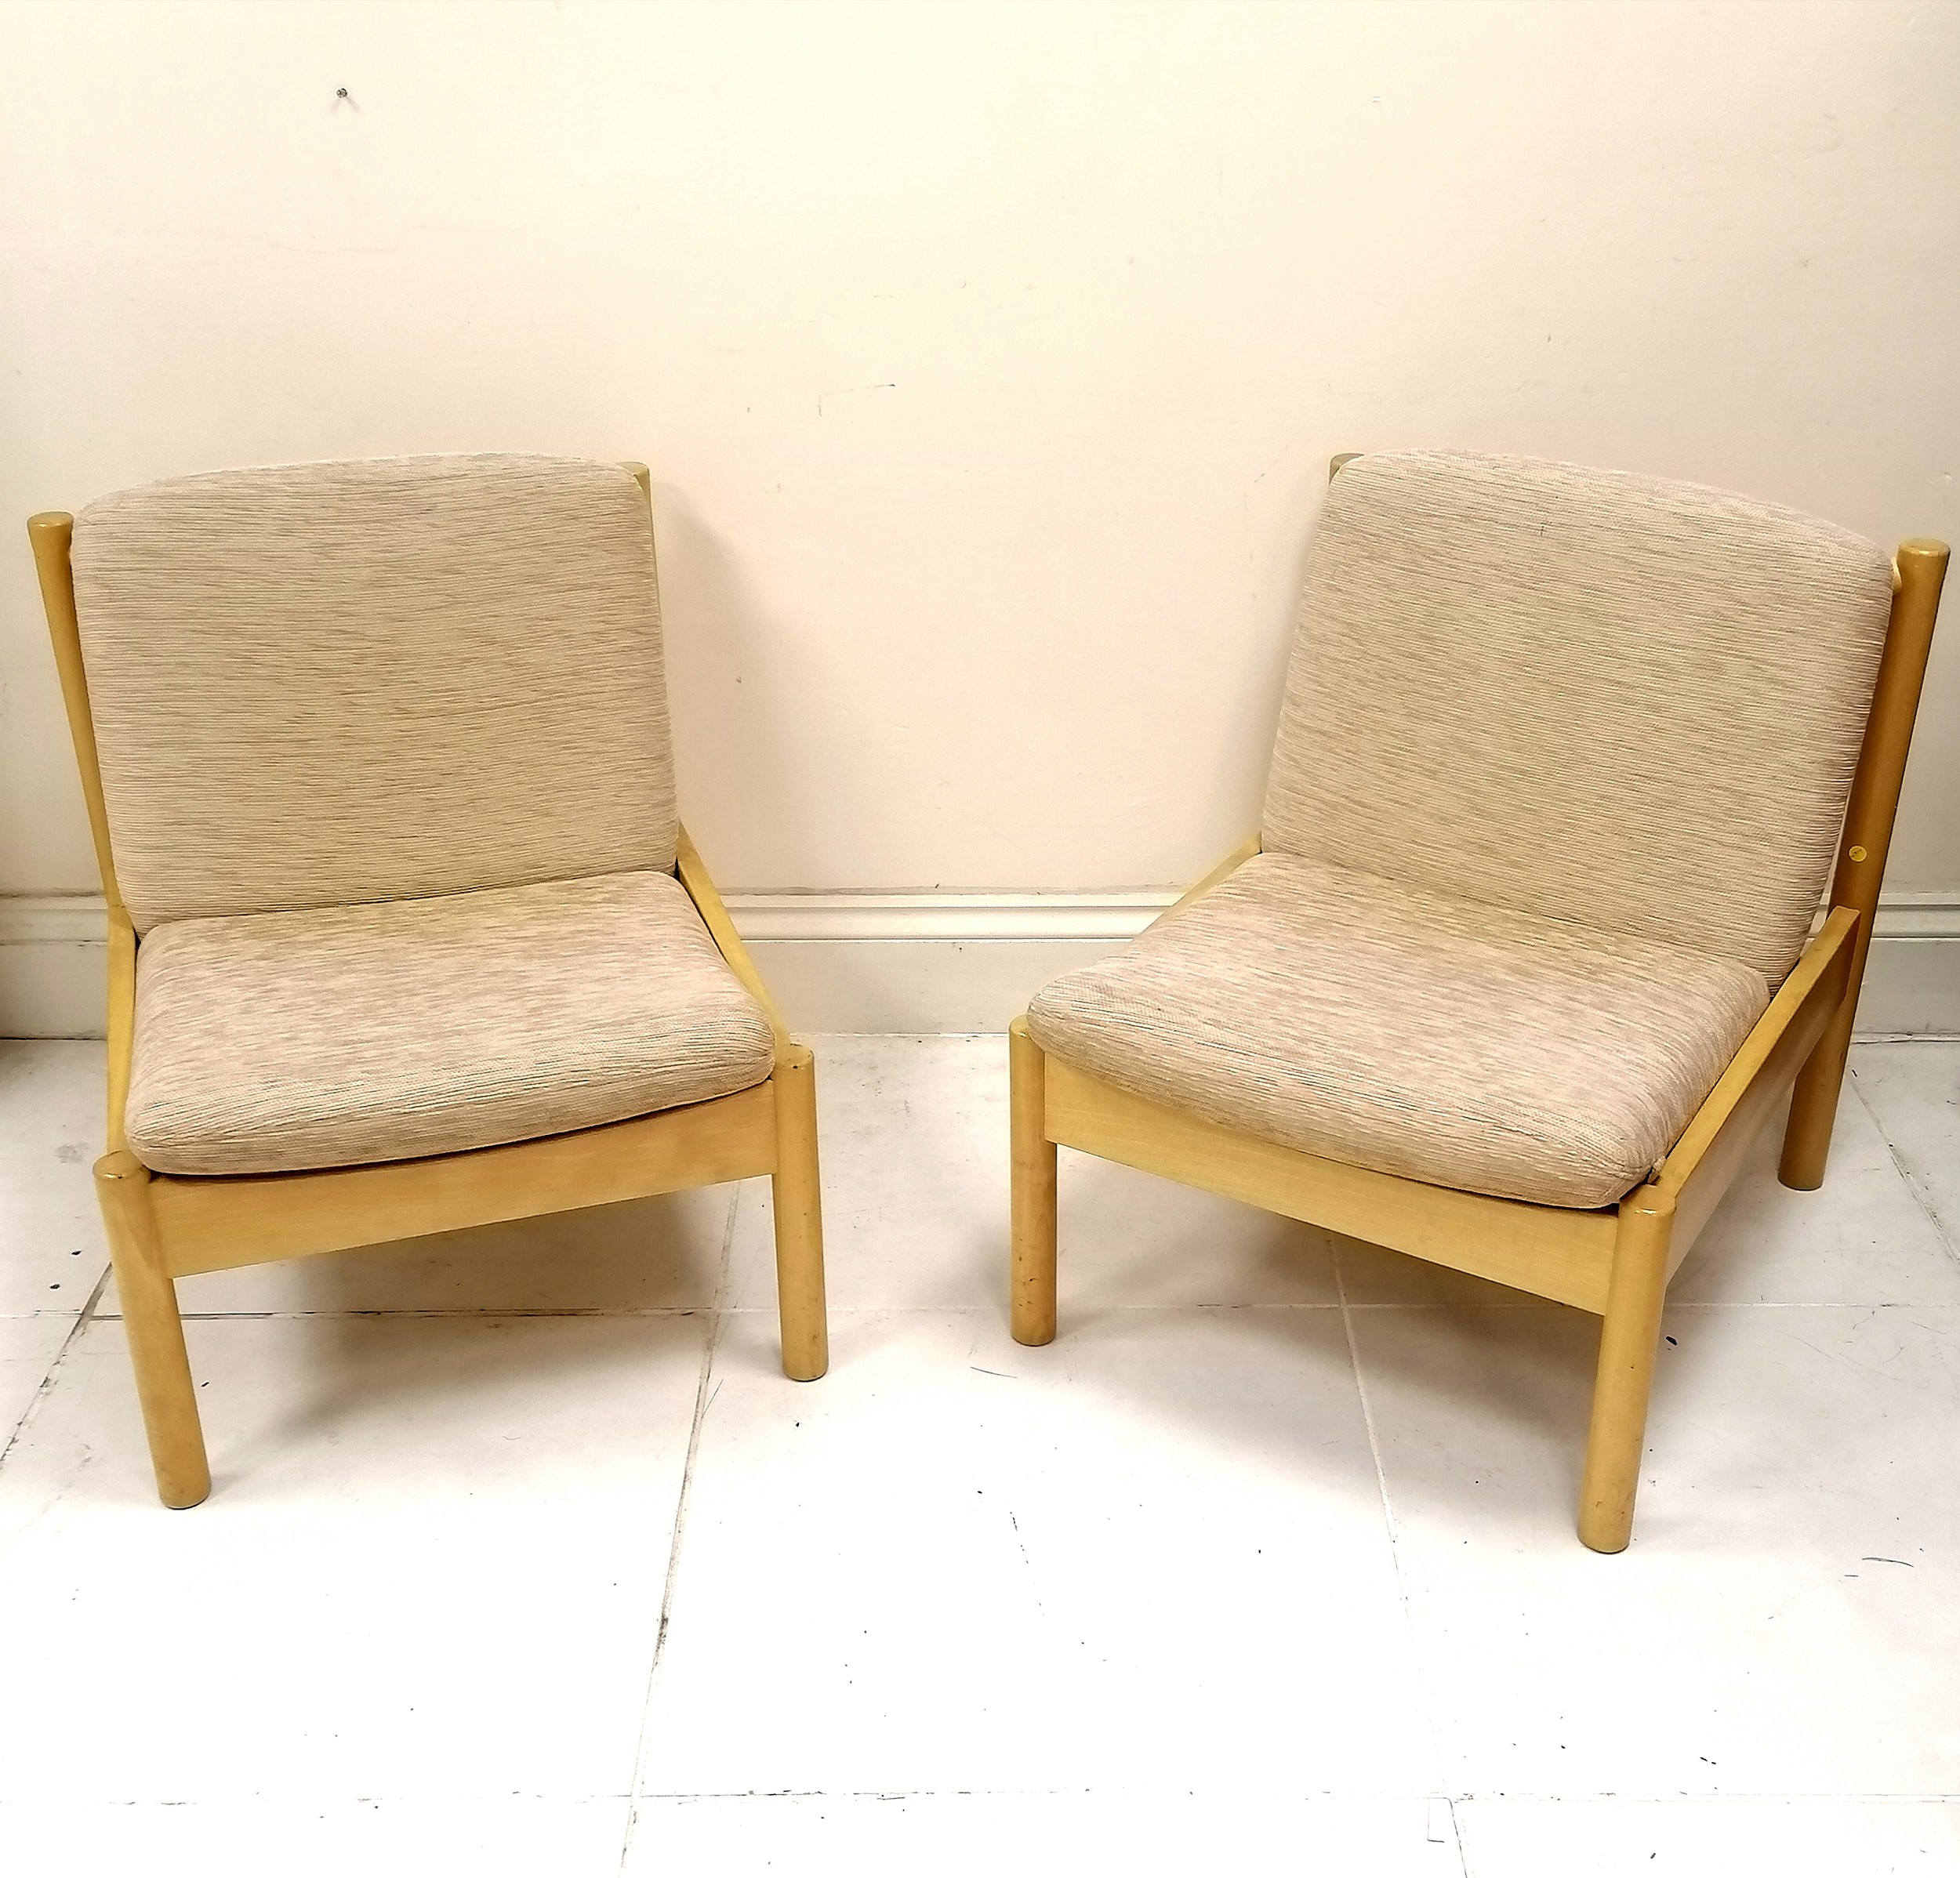 Pair of Blonde Elm Ercol easy chairs, with original oatmeal coloured upholstered cushions. in good - Image 5 of 7